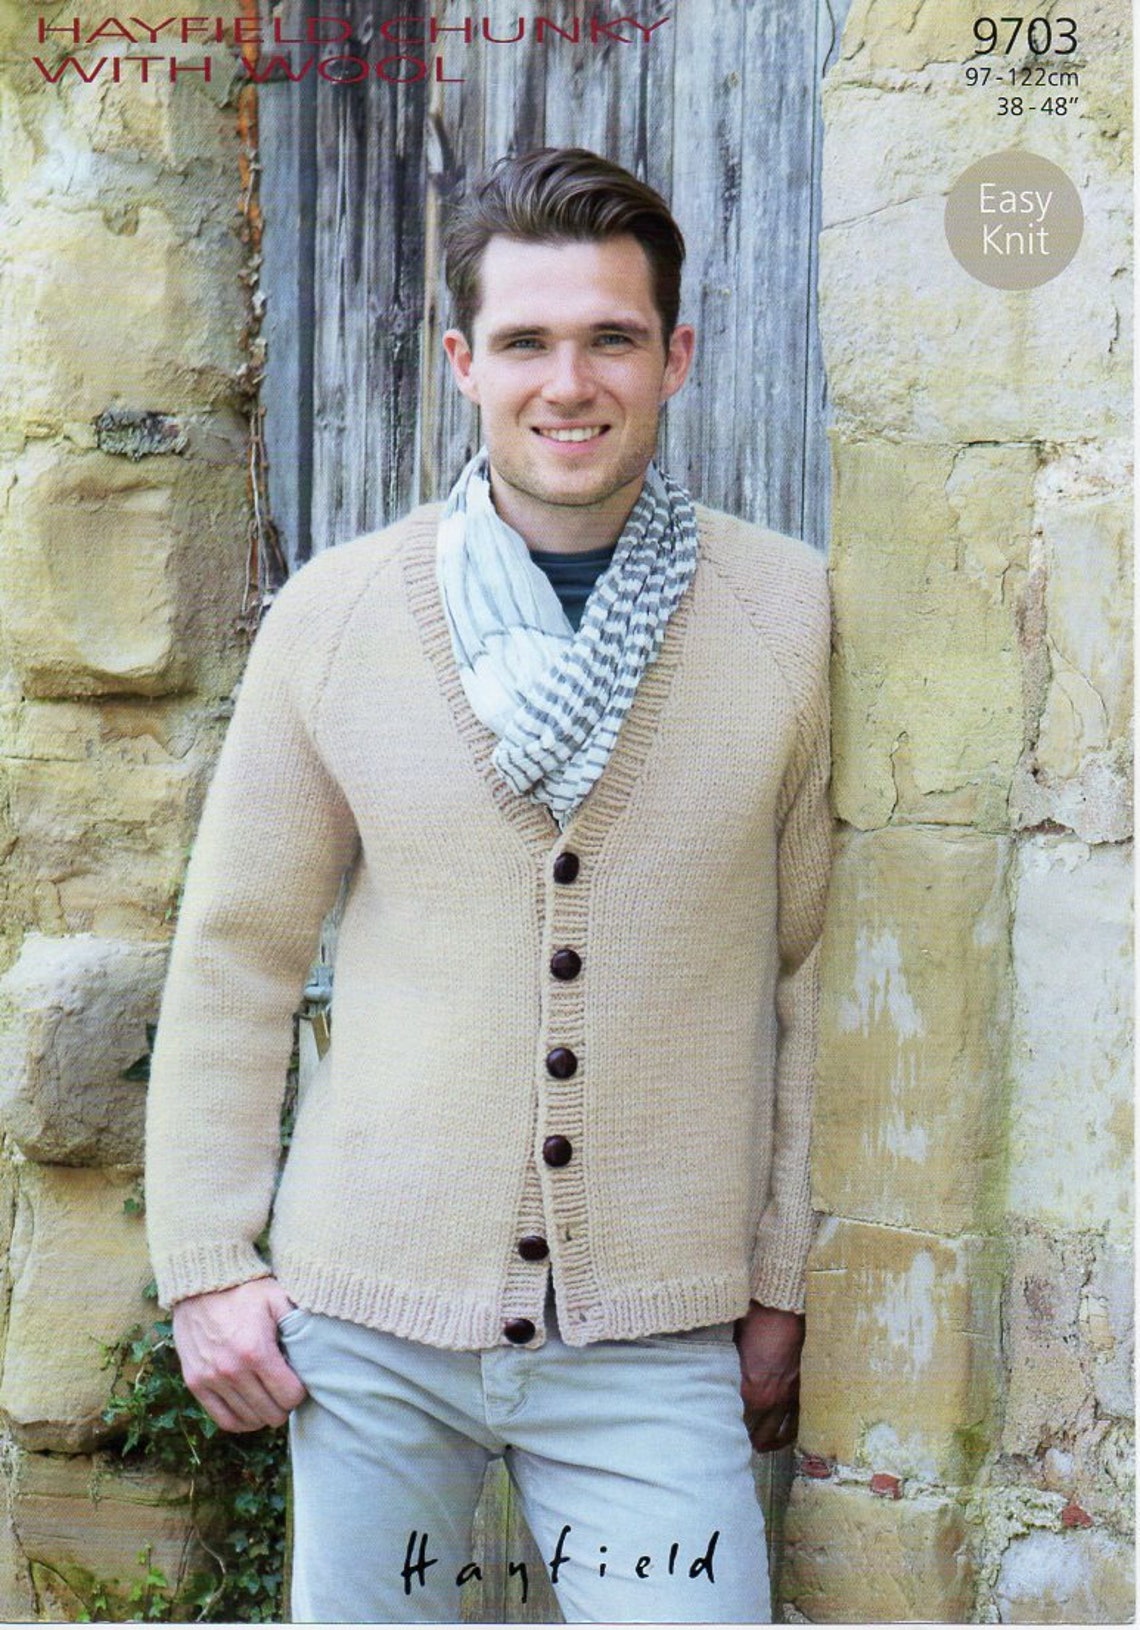 Hayfield Chunky With Wool Easy Knit Mens Cardigan Knitting - Etsy